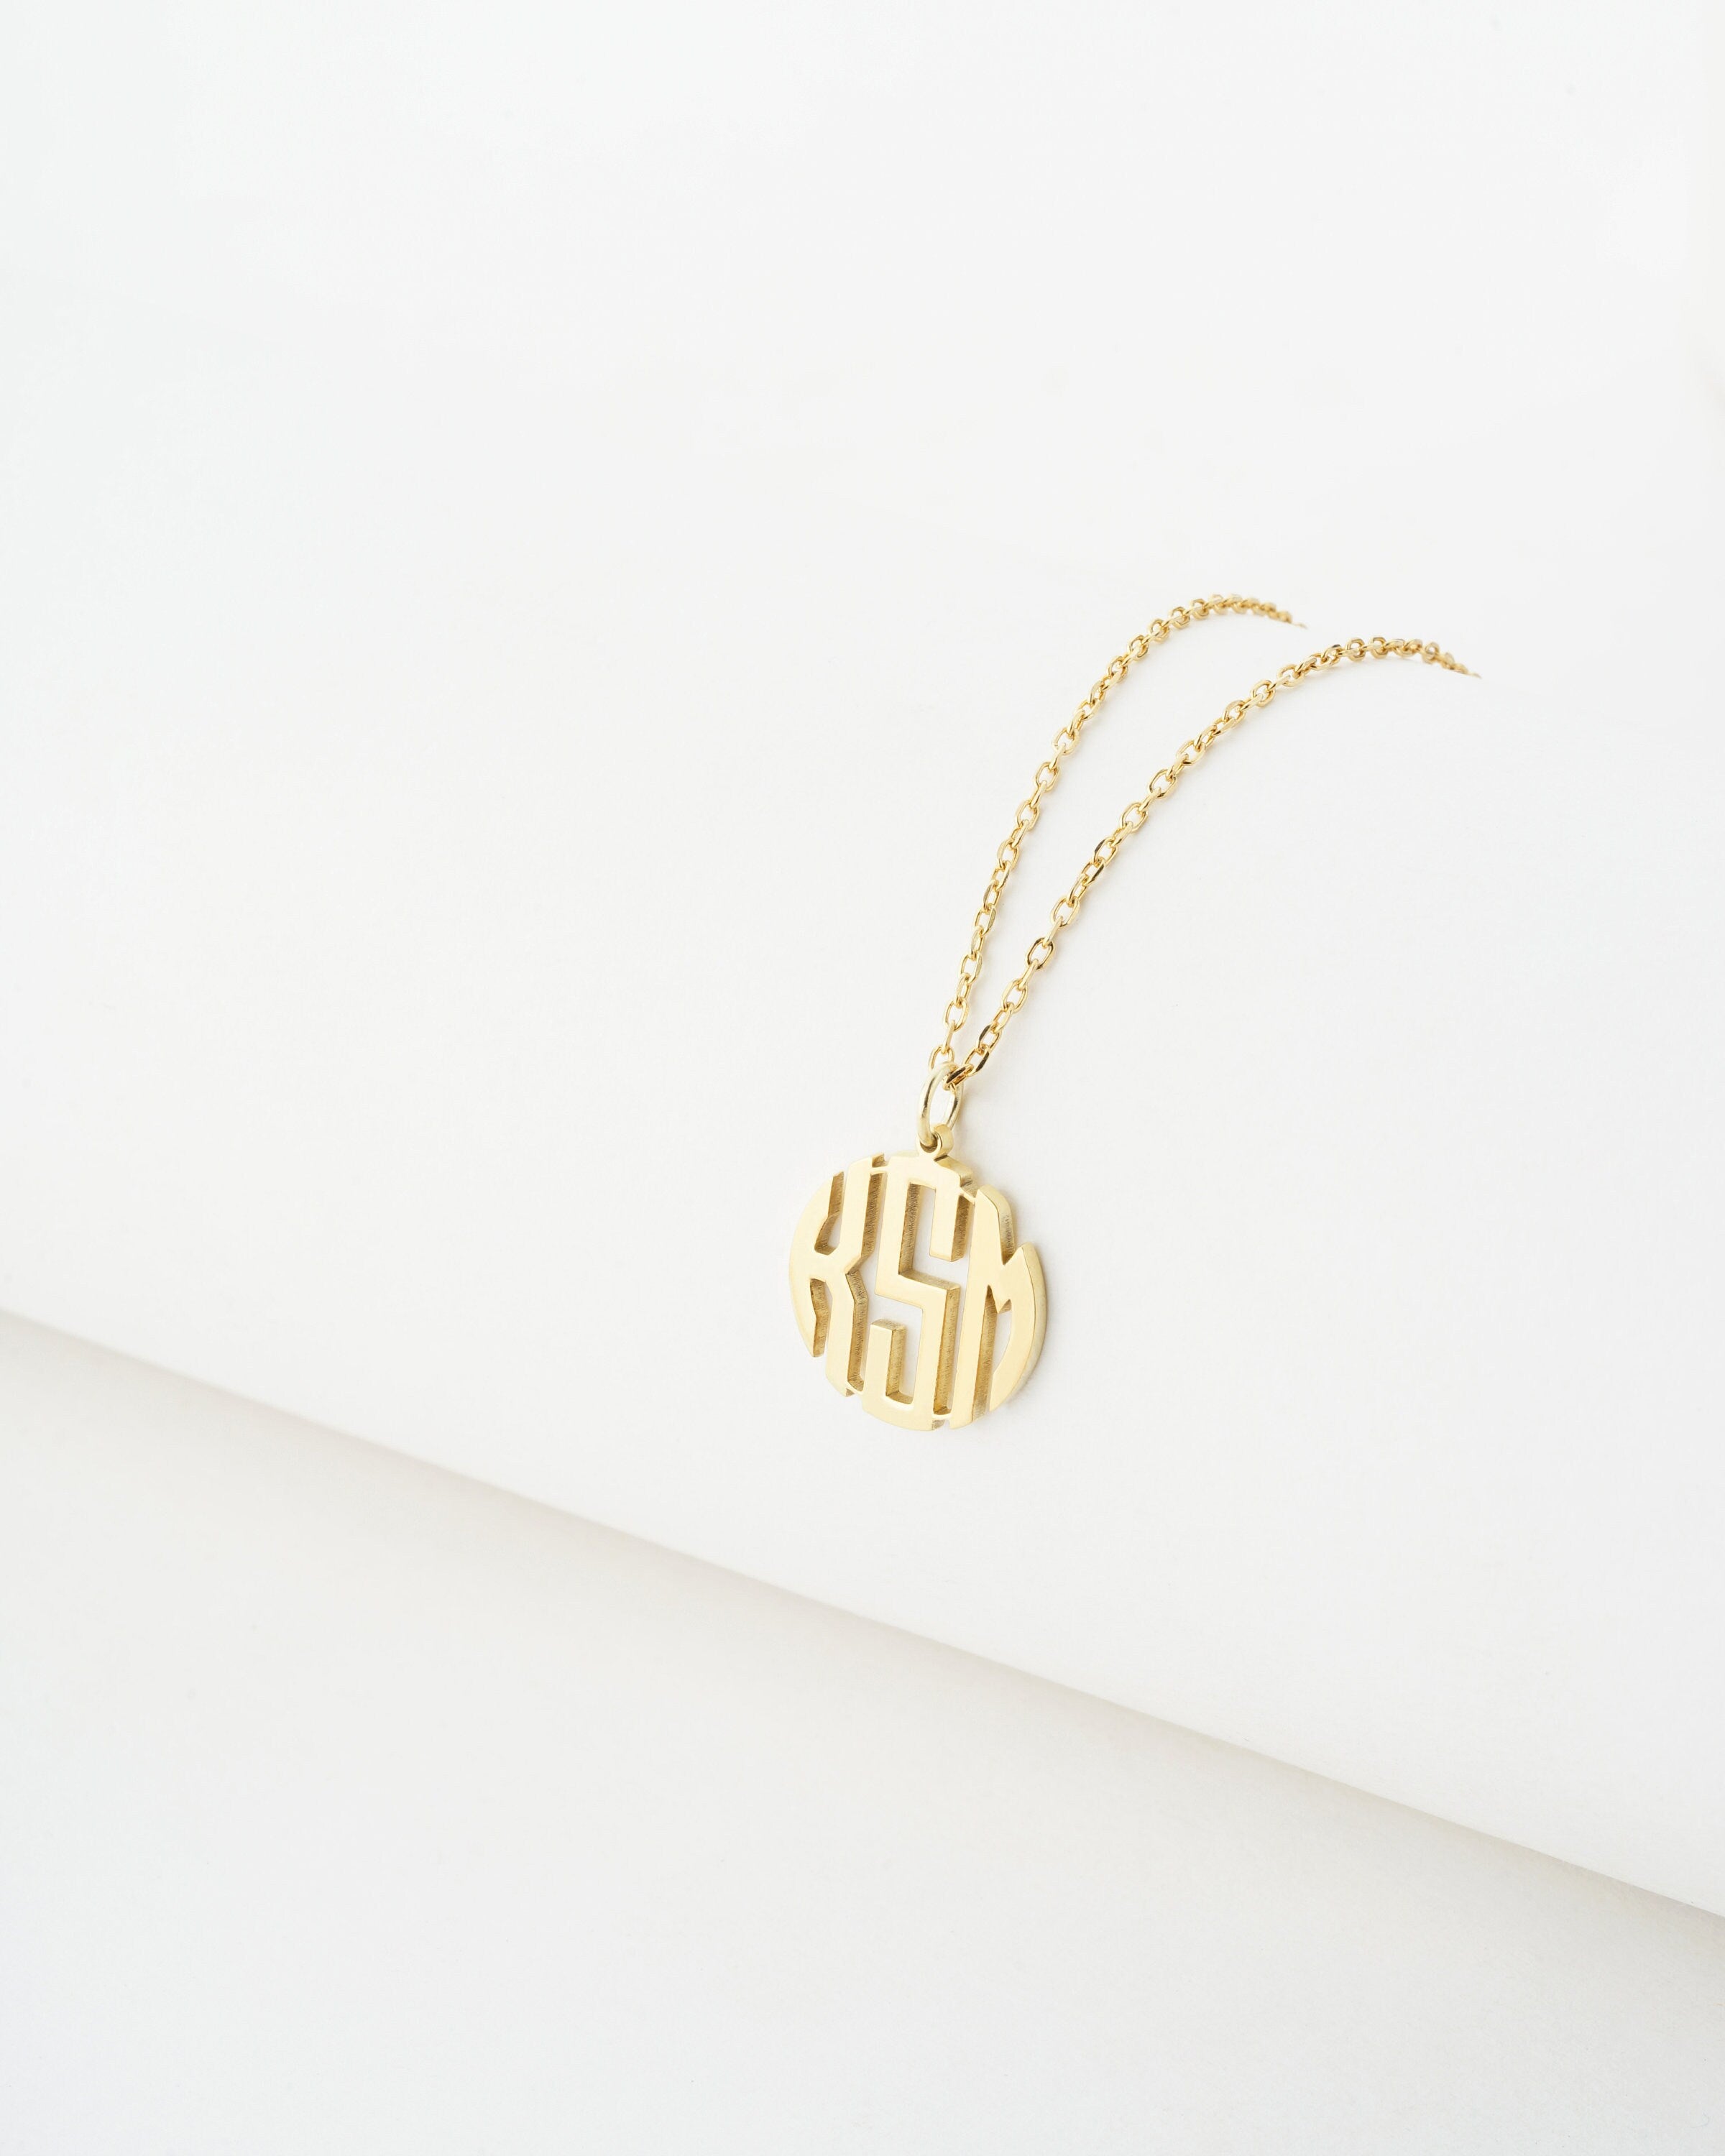 Couples Initials Necklace | Gold Filled Couple Necklace | Girlfriend  Necklace | Children's Initials Necklace | Gift for Her